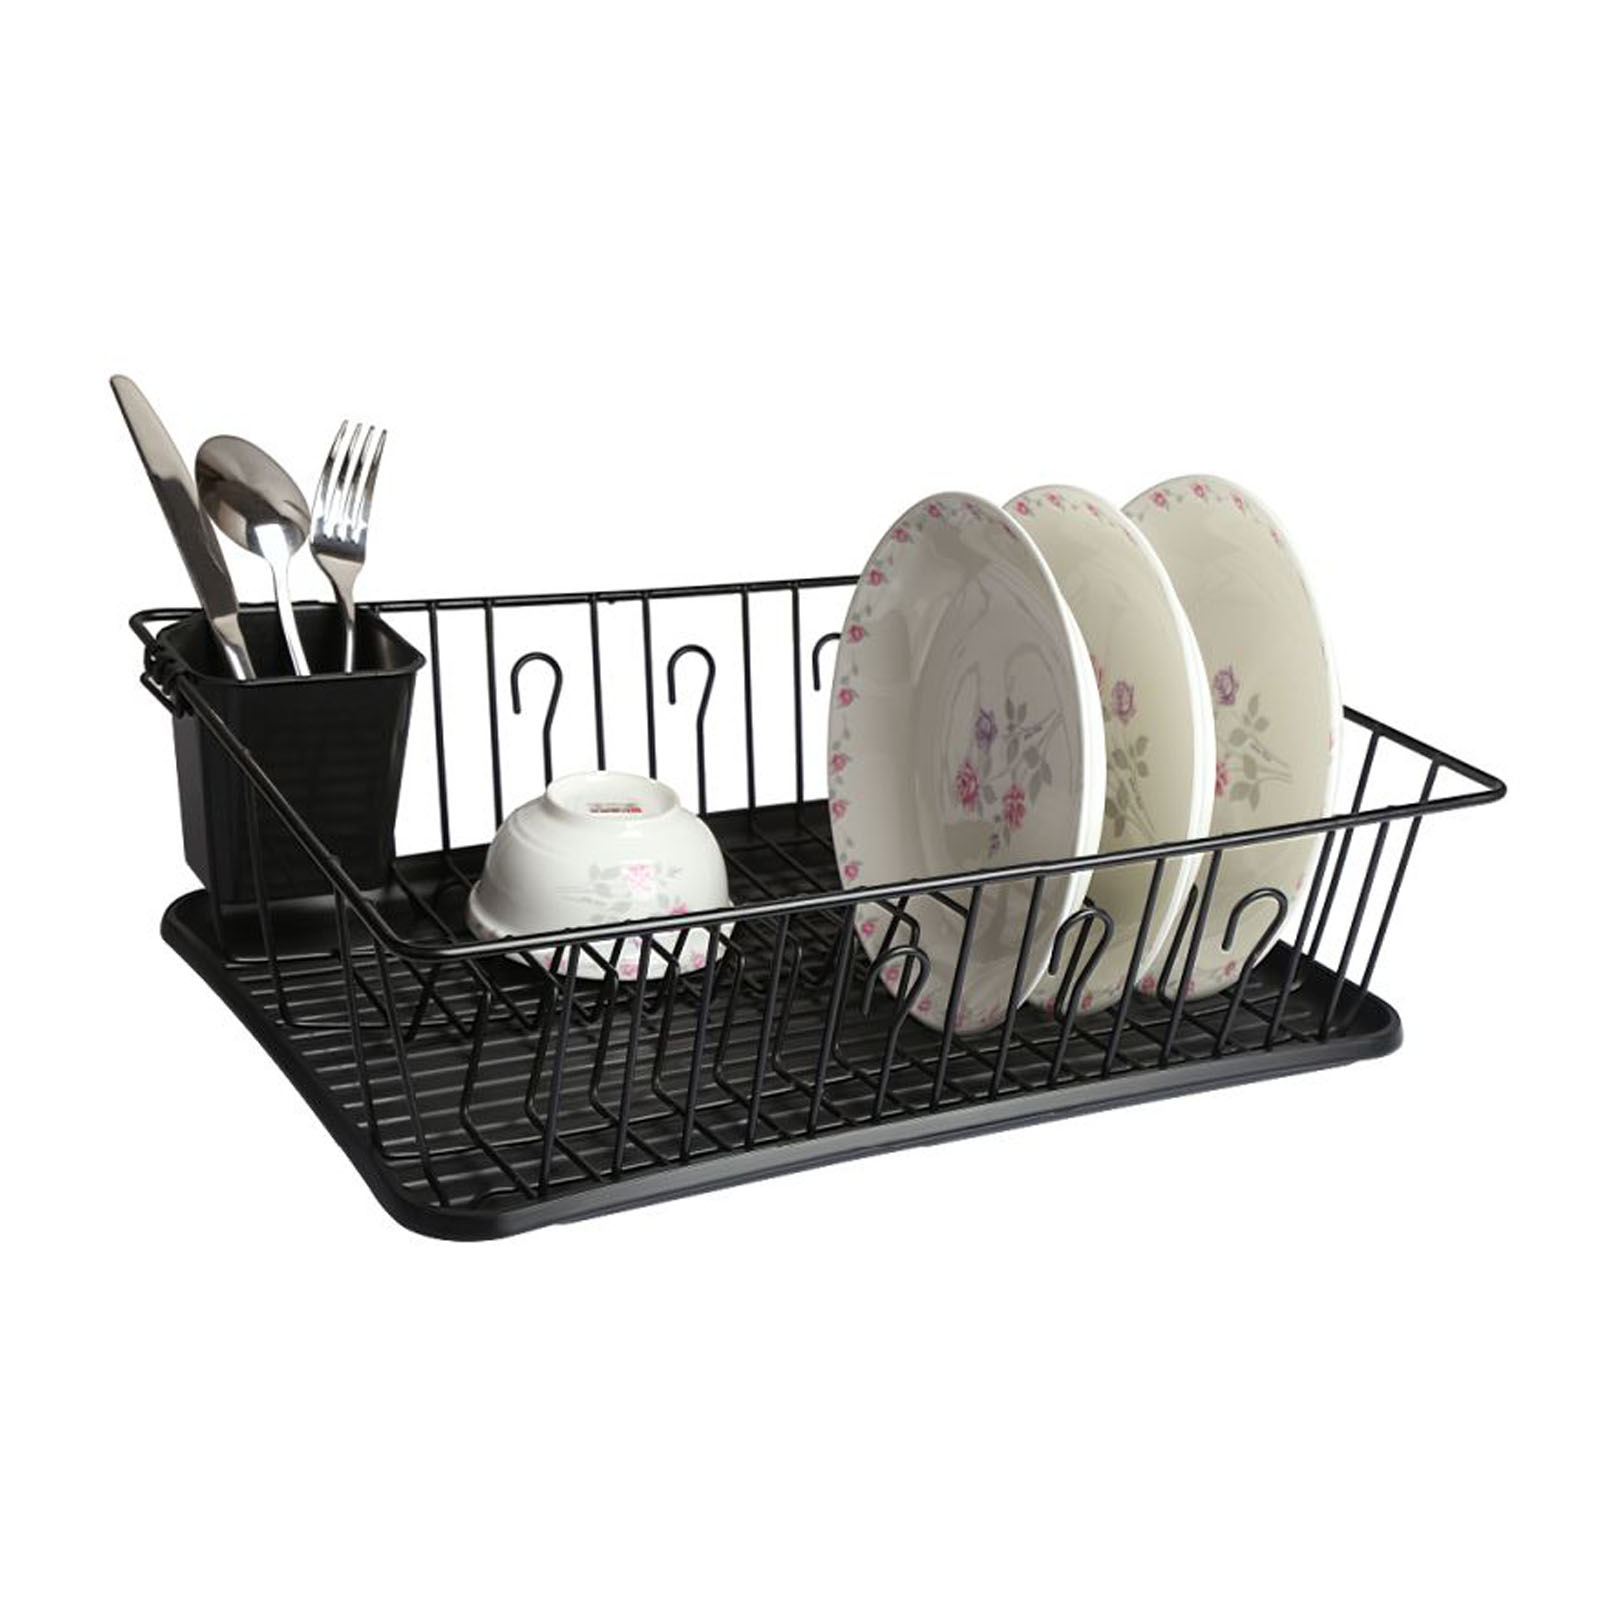 Mega Chef 17.5 Inch Black Dish Rack with 14 Plate Positioners and a Detachable Utensil Holder